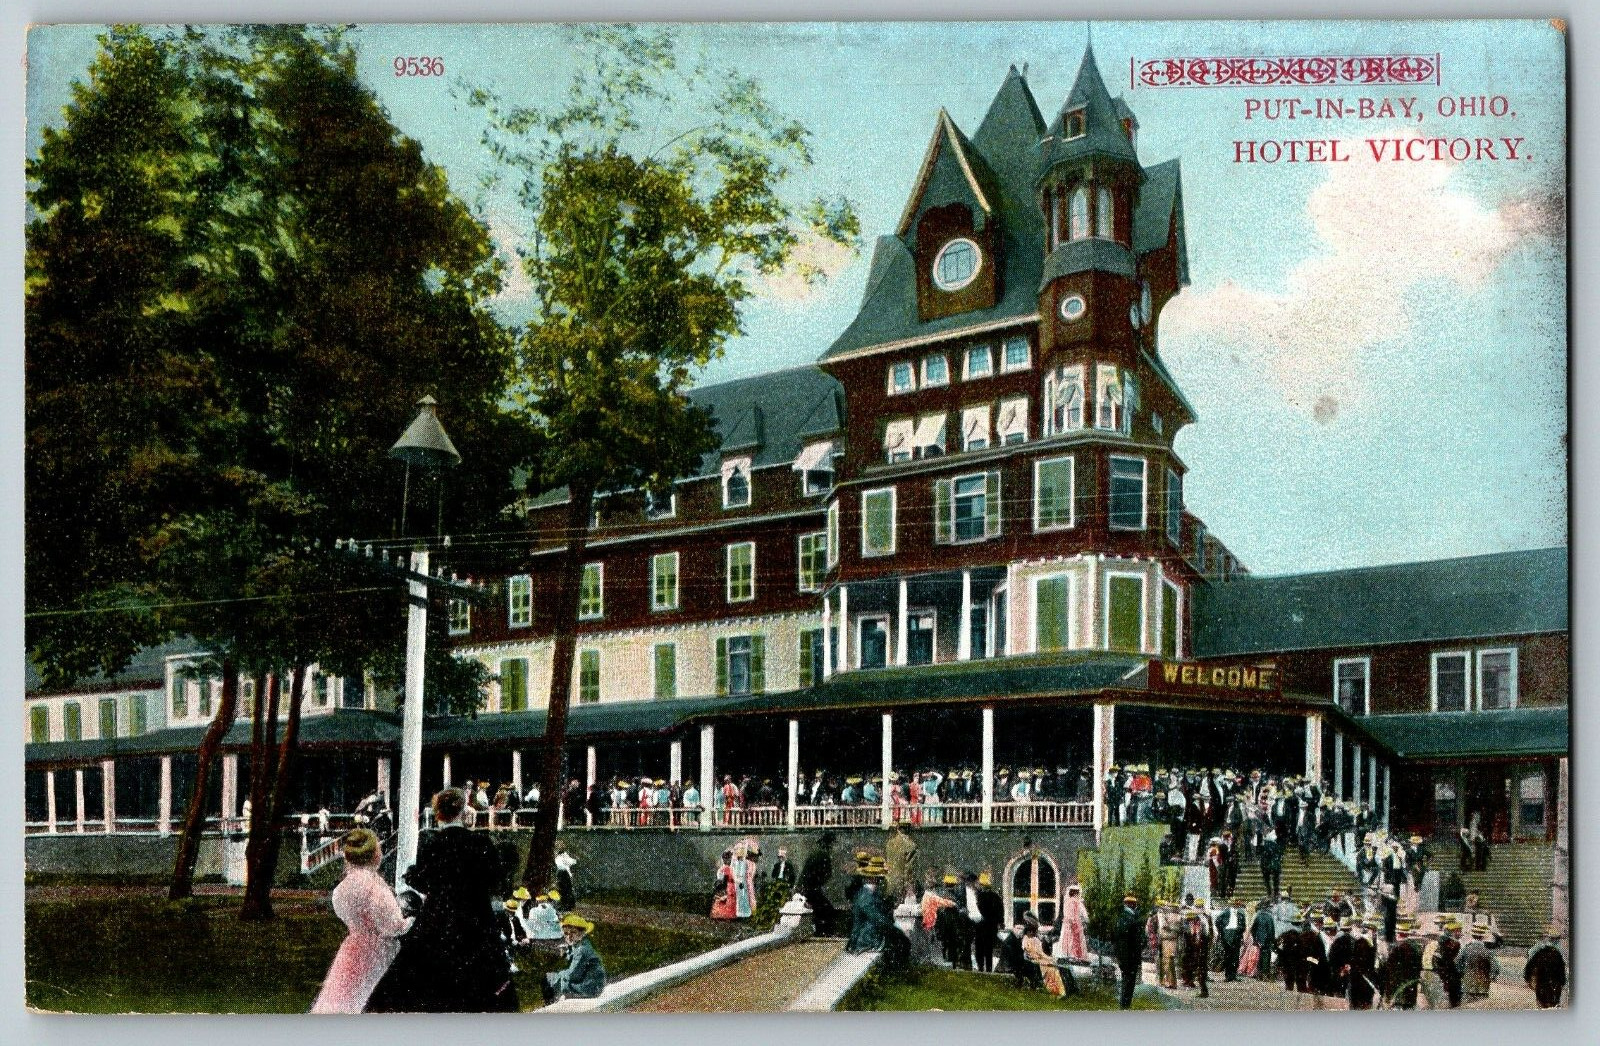 Put-in-Bay, Ohio - Hotel Victory - Vintage Postcard - Posted